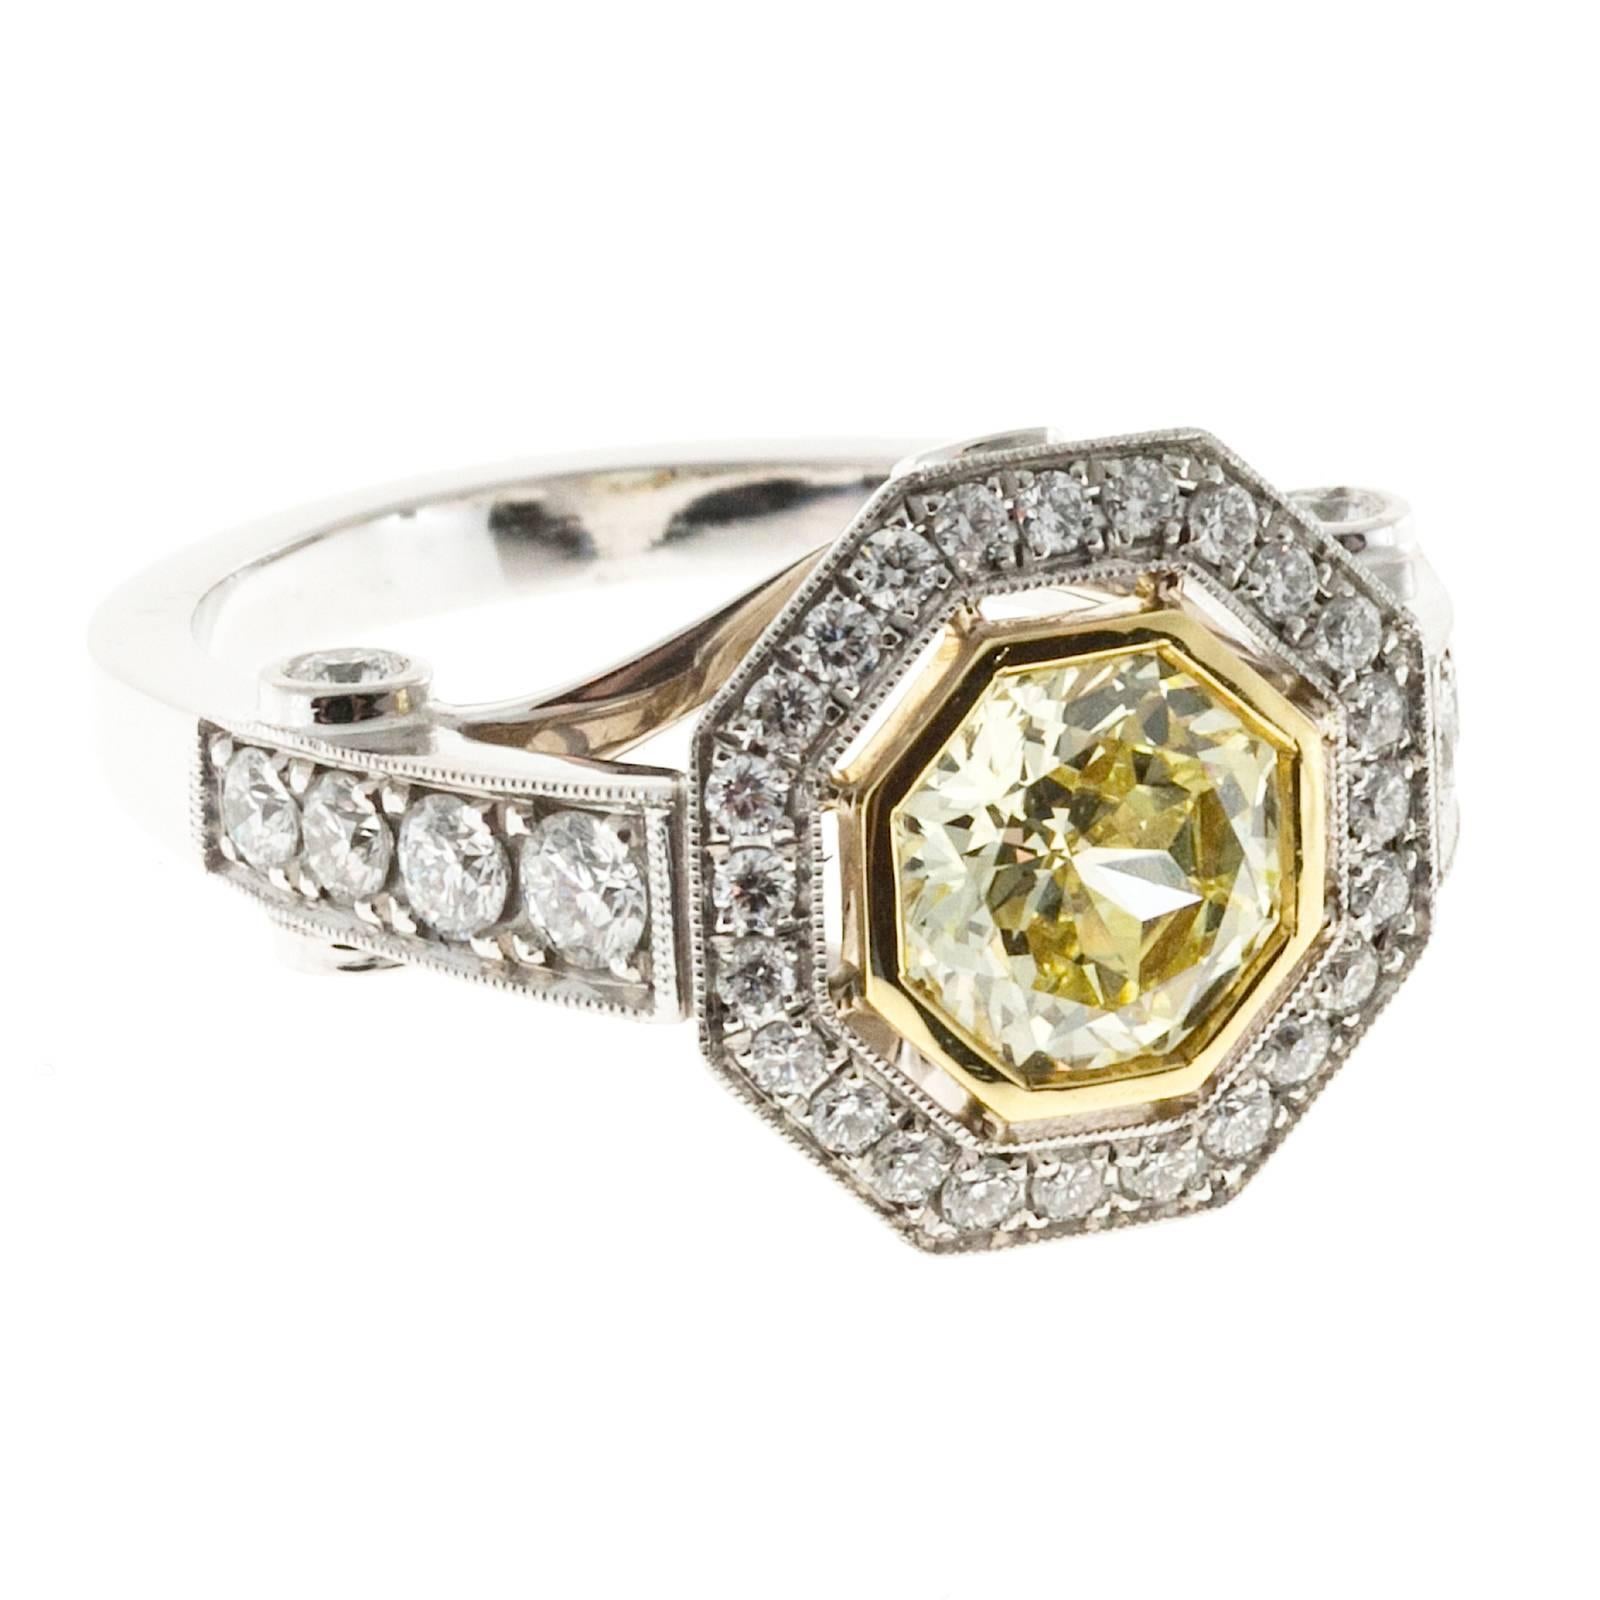 8 sided natural yellow diamond with white diamond halo platinum engagement ring designed just for this stone by the Peter Suchy Design Workshop. EGL Cert #US 69676501D

1 octagonal 8 sided natural light to fancy light yellow diamond, approx. total